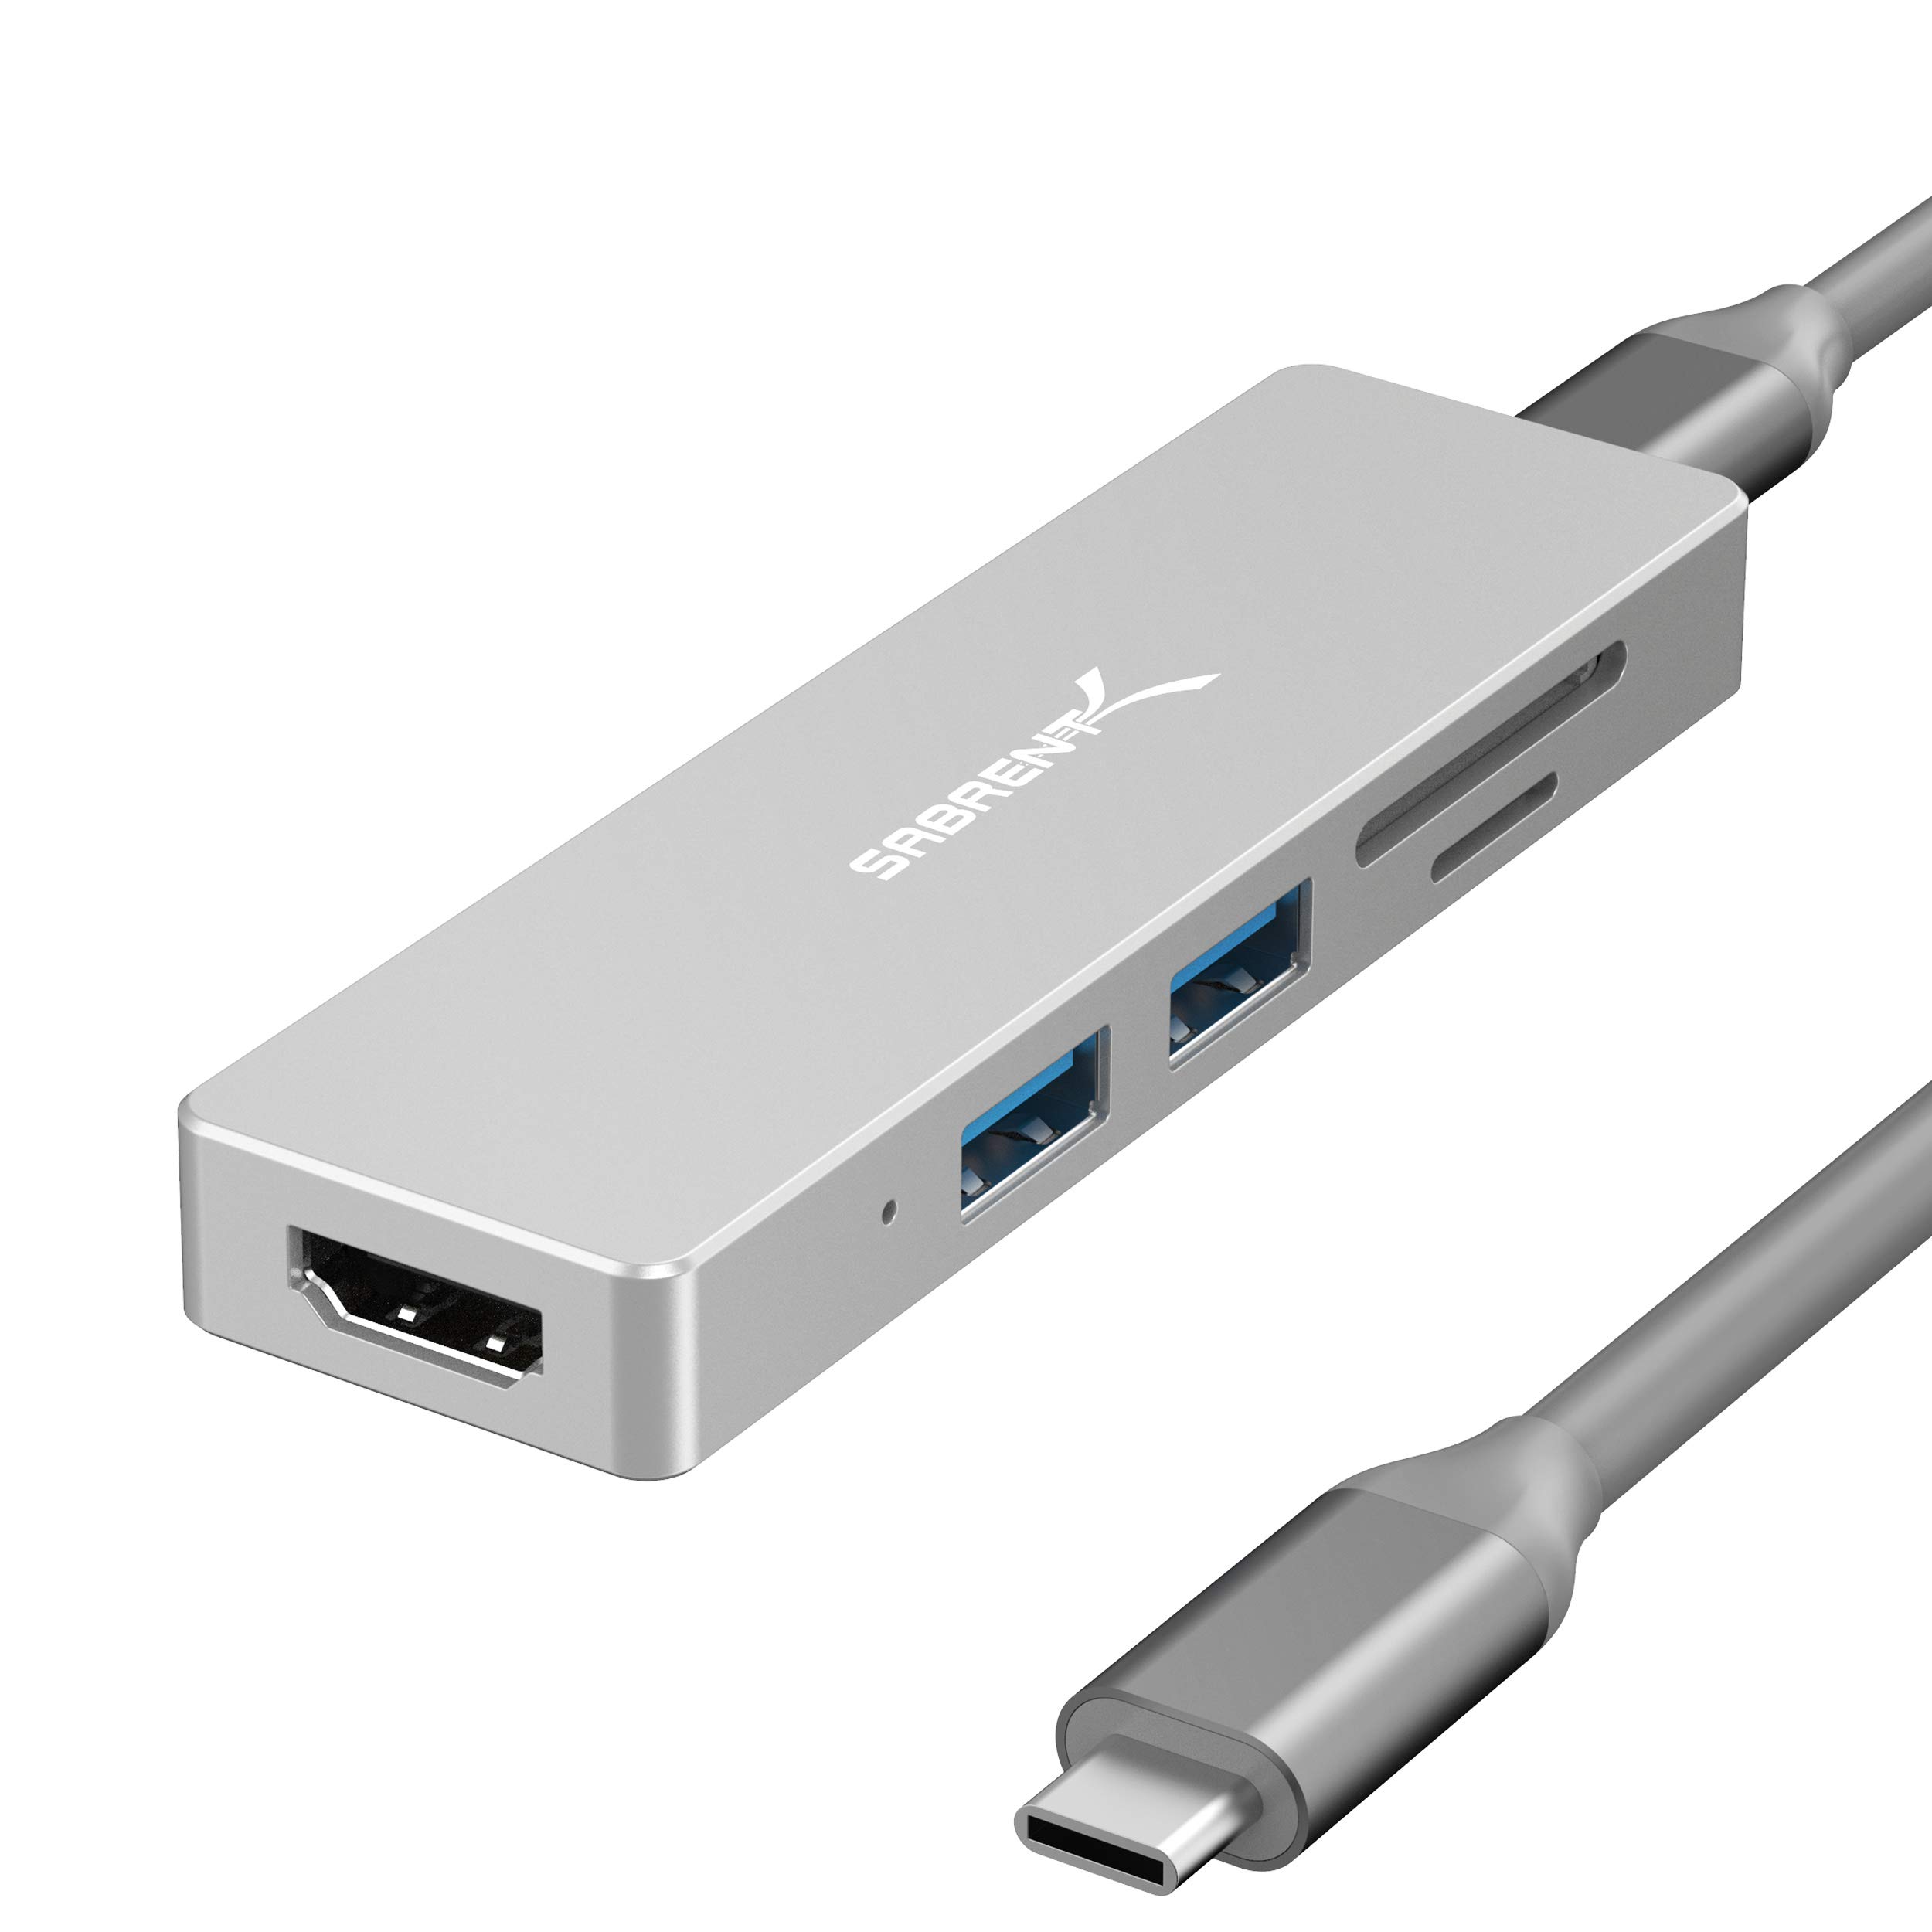 SABRENT 5 in 1 USB c Multi-Port HUB for Windows & Mac OS  SD & Micro SD card-Reader  HDMI 20 Port - Up to 4K @30Hz  2 x USB 30 P